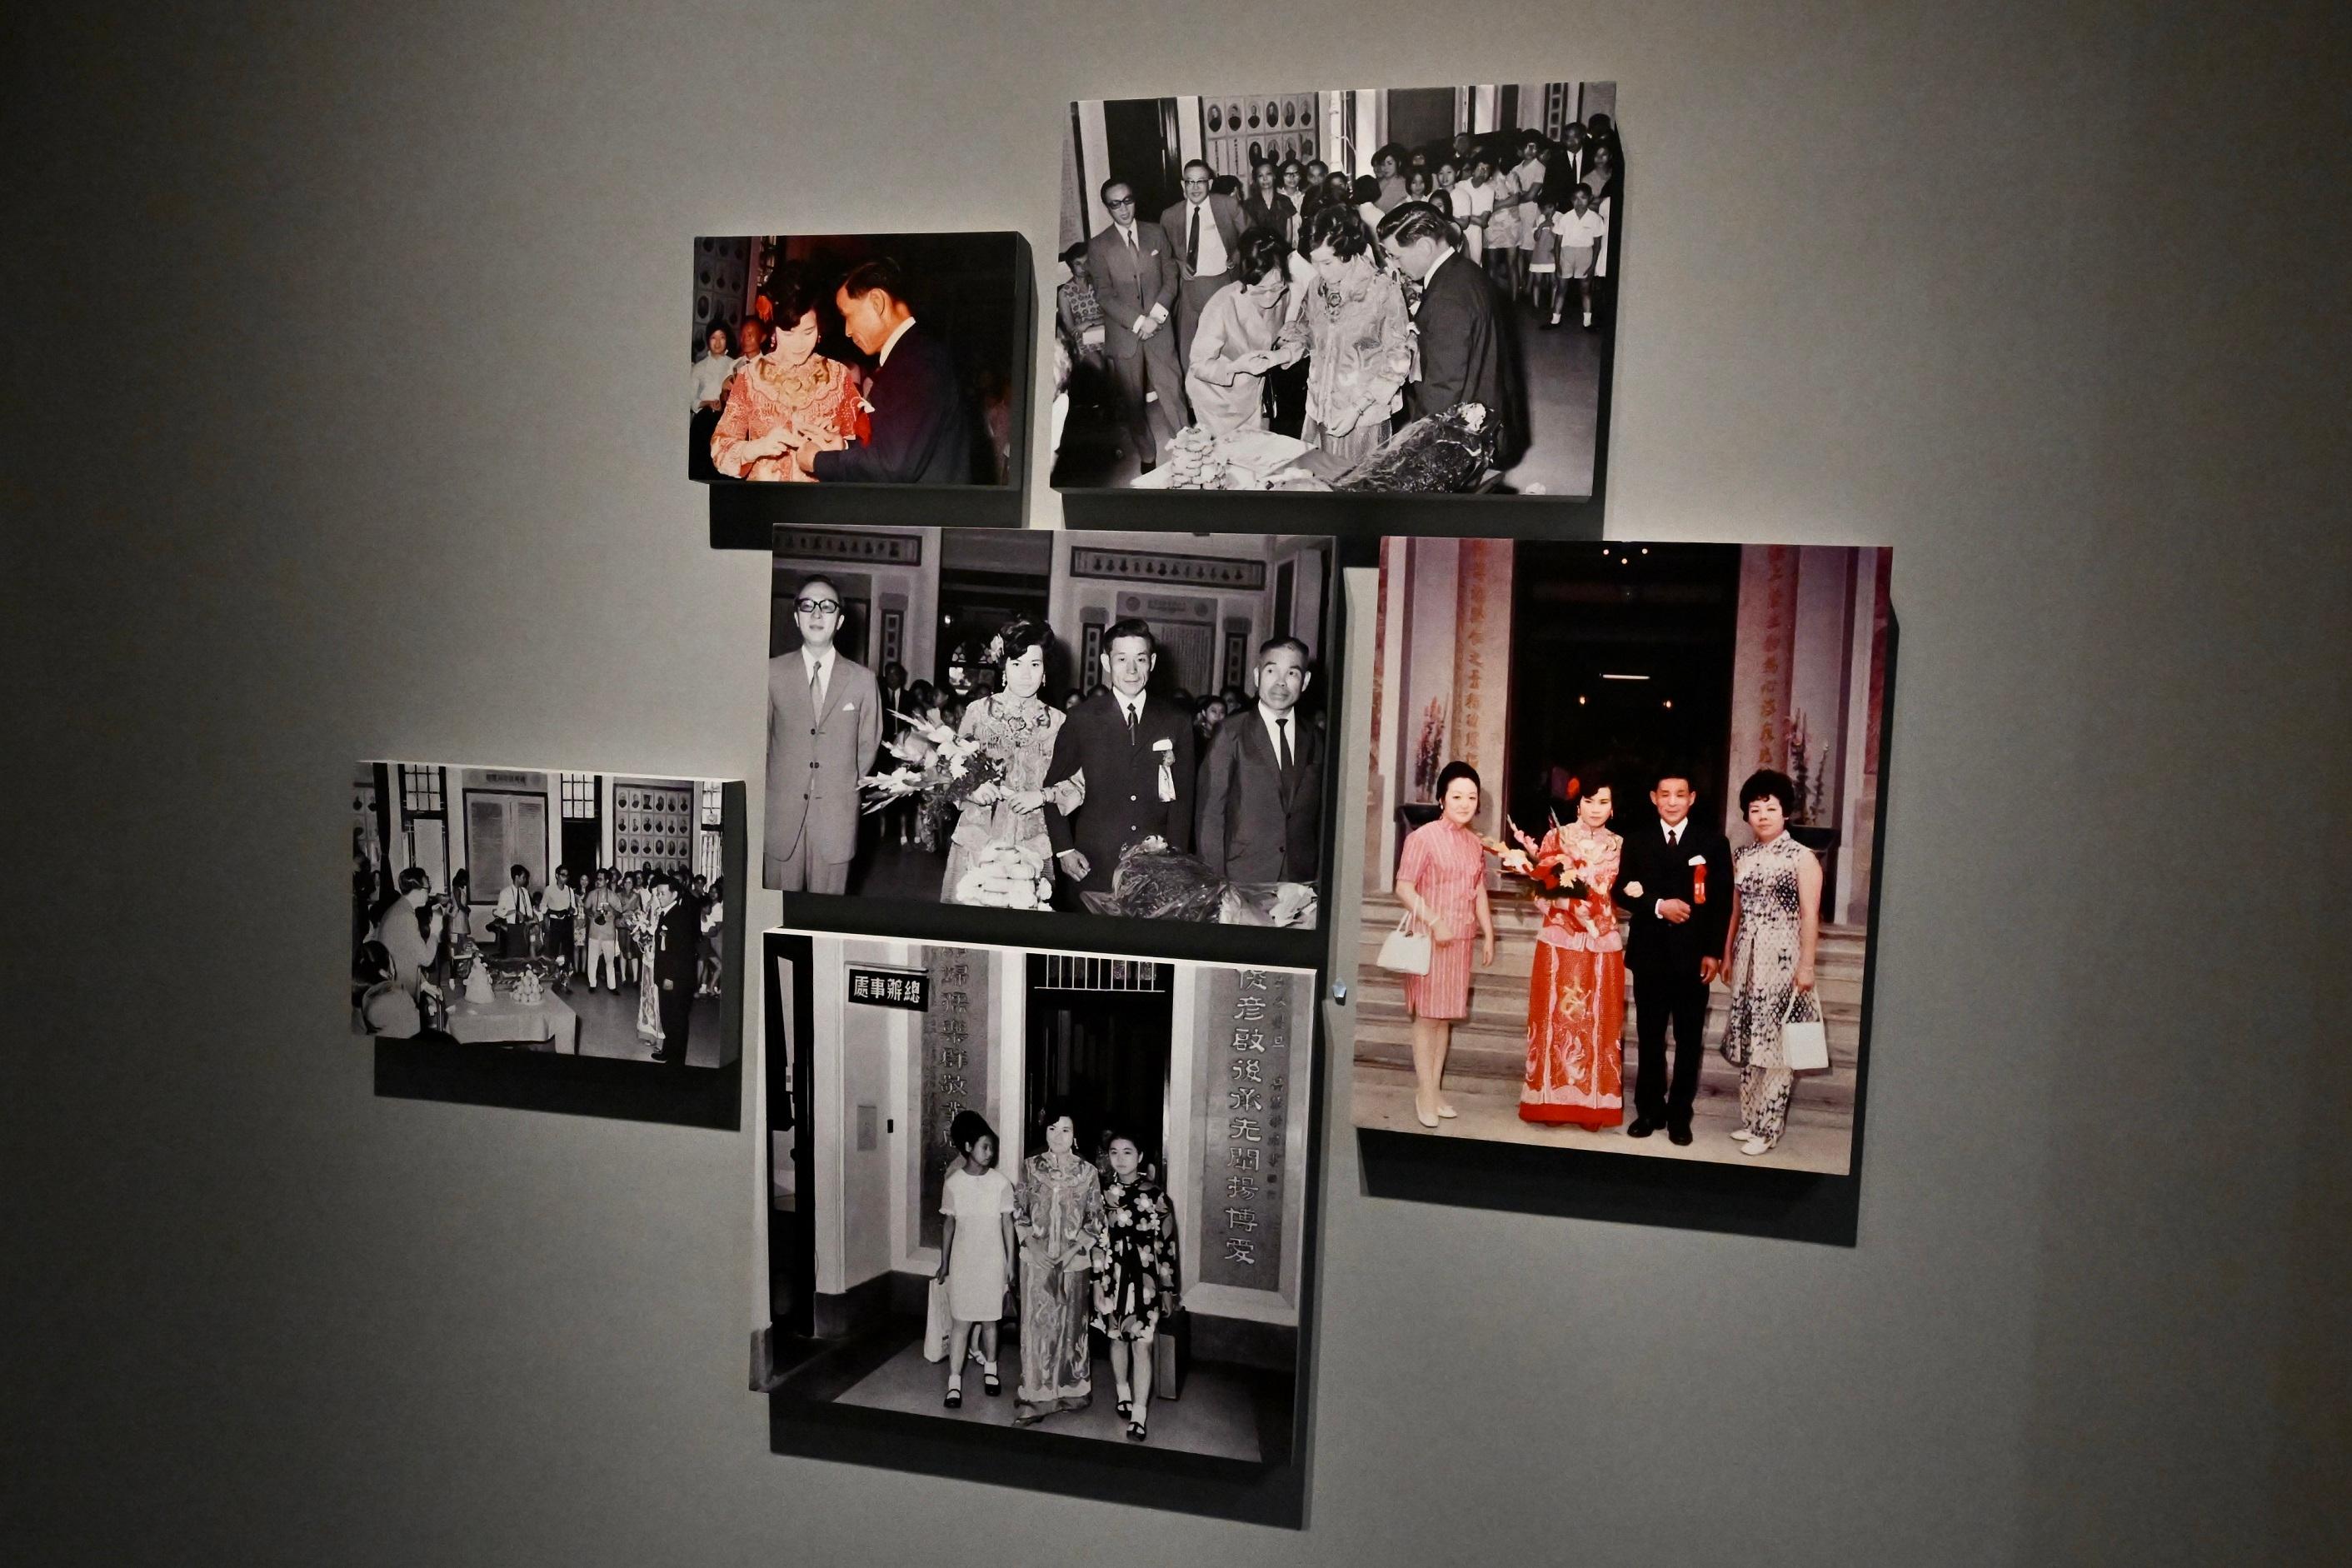 The opening ceremony for the exhibition "Po Leung Kuk 145th Anniversary: Building Charity with Benevolence" was held today (October 17) at the Hong Kong Heritage Museum. Photo shows snapshots depicting the last marriage ceremony of the marriage arrangement service by Po Leung Kuk in 1971.
